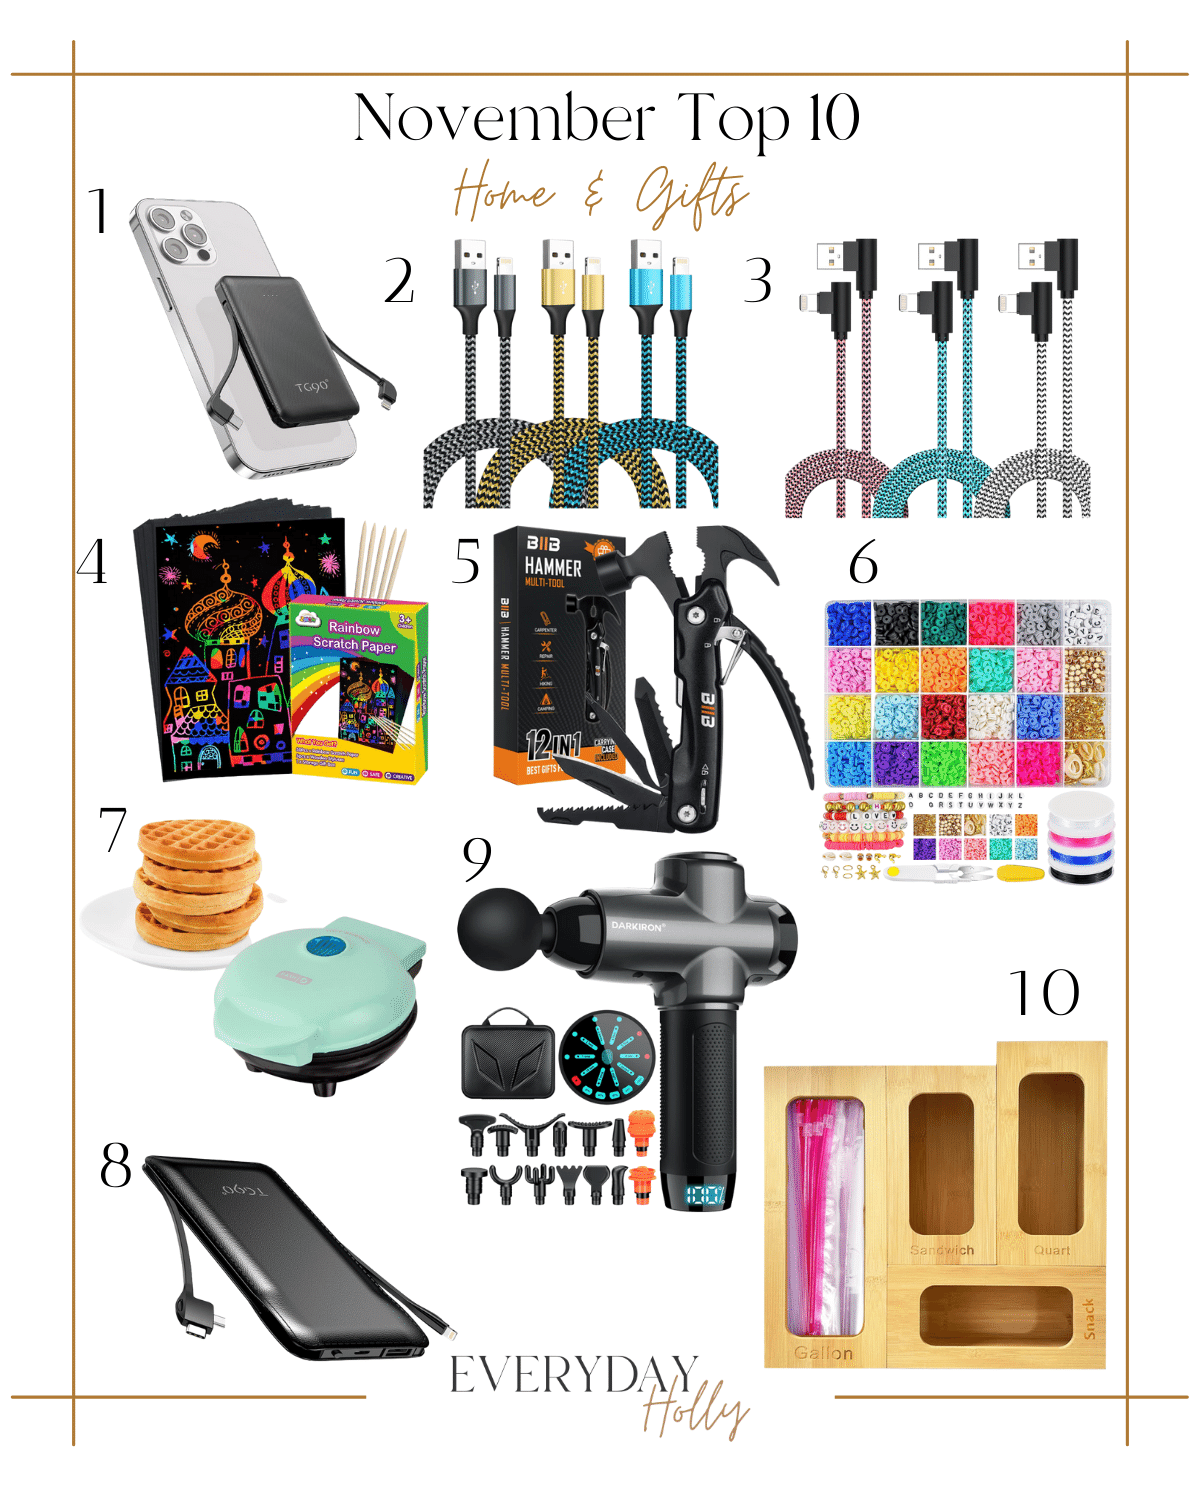 best sellers, top 10 november home items, portable chargers, packs of chargers, rainbow scratch paper, hammer tool kit, bracelet bead kit, waffle maker, massage gun, ziplock bag storage